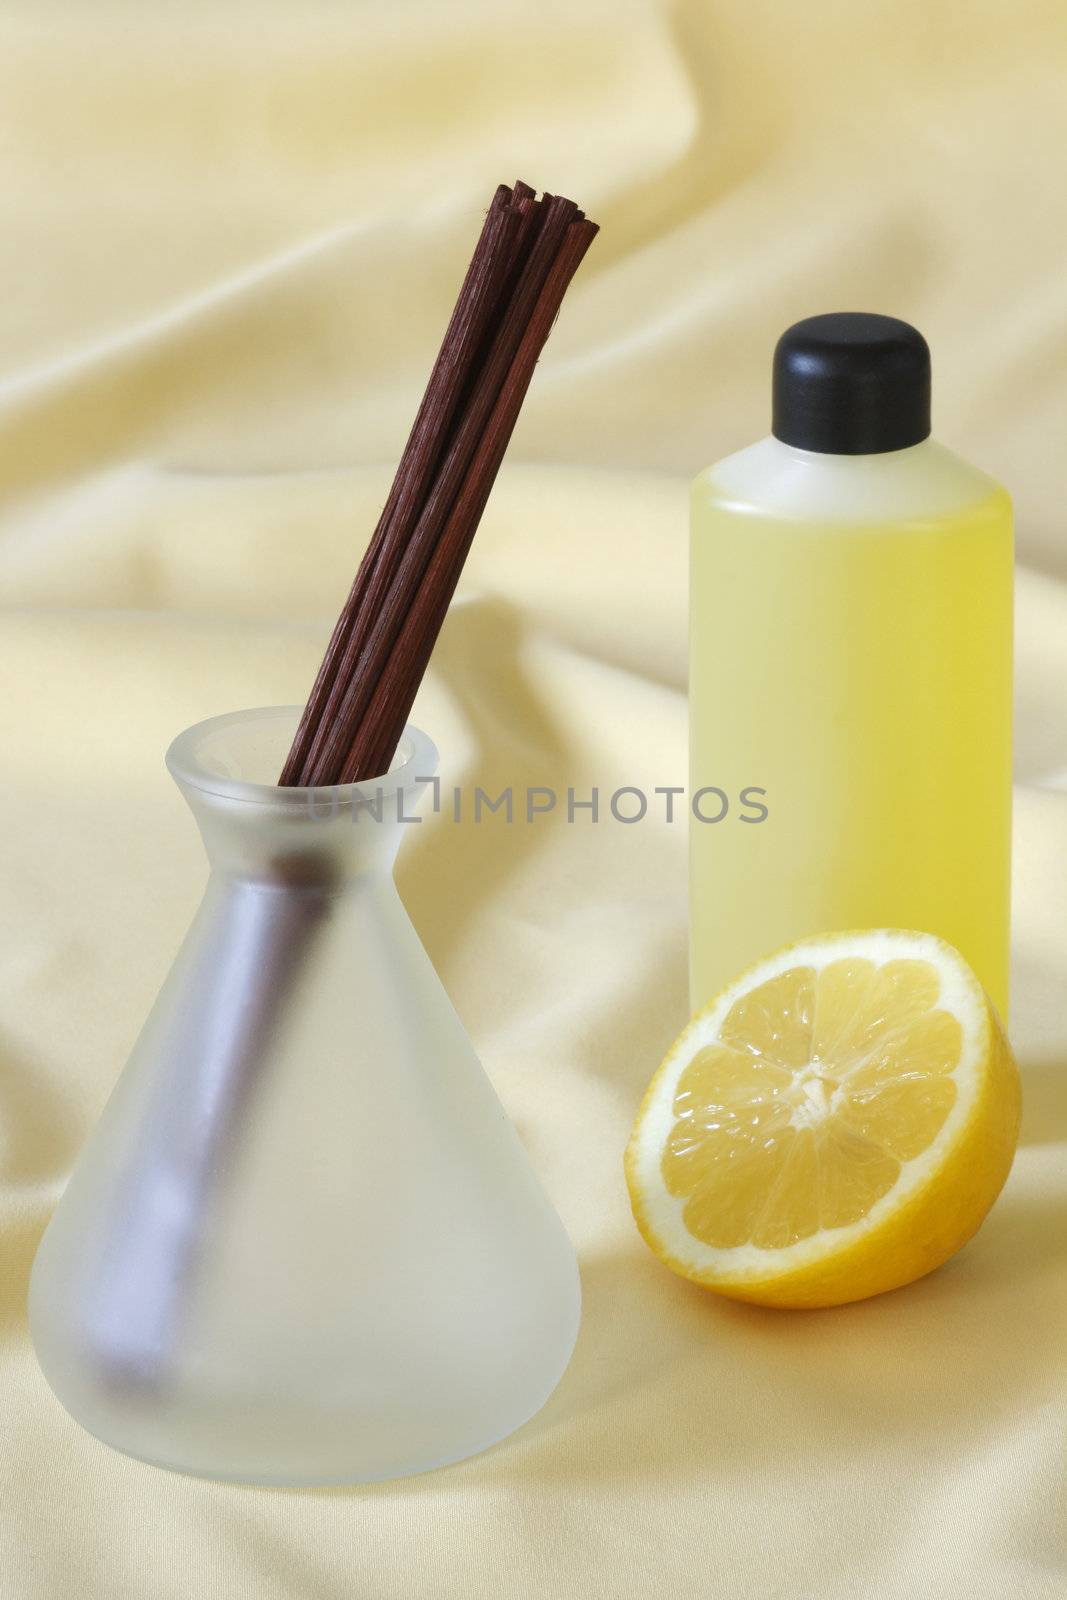 Wooden sticks in essential oil with lemon